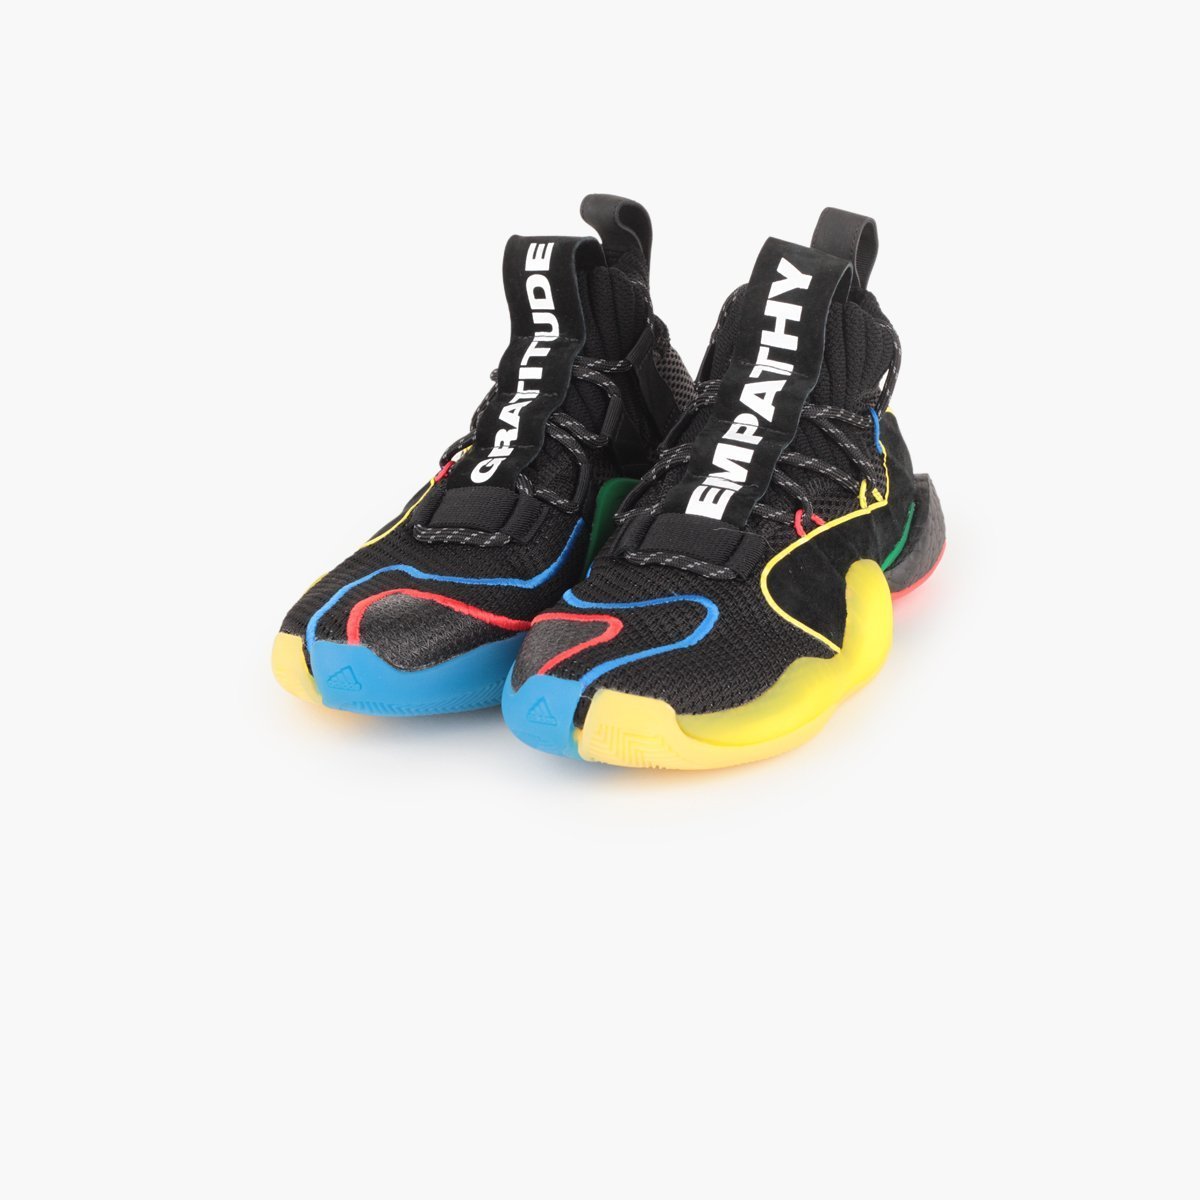 adidas Originals by Pharrell Williams Crazy BYW LVL-SUEDE Store